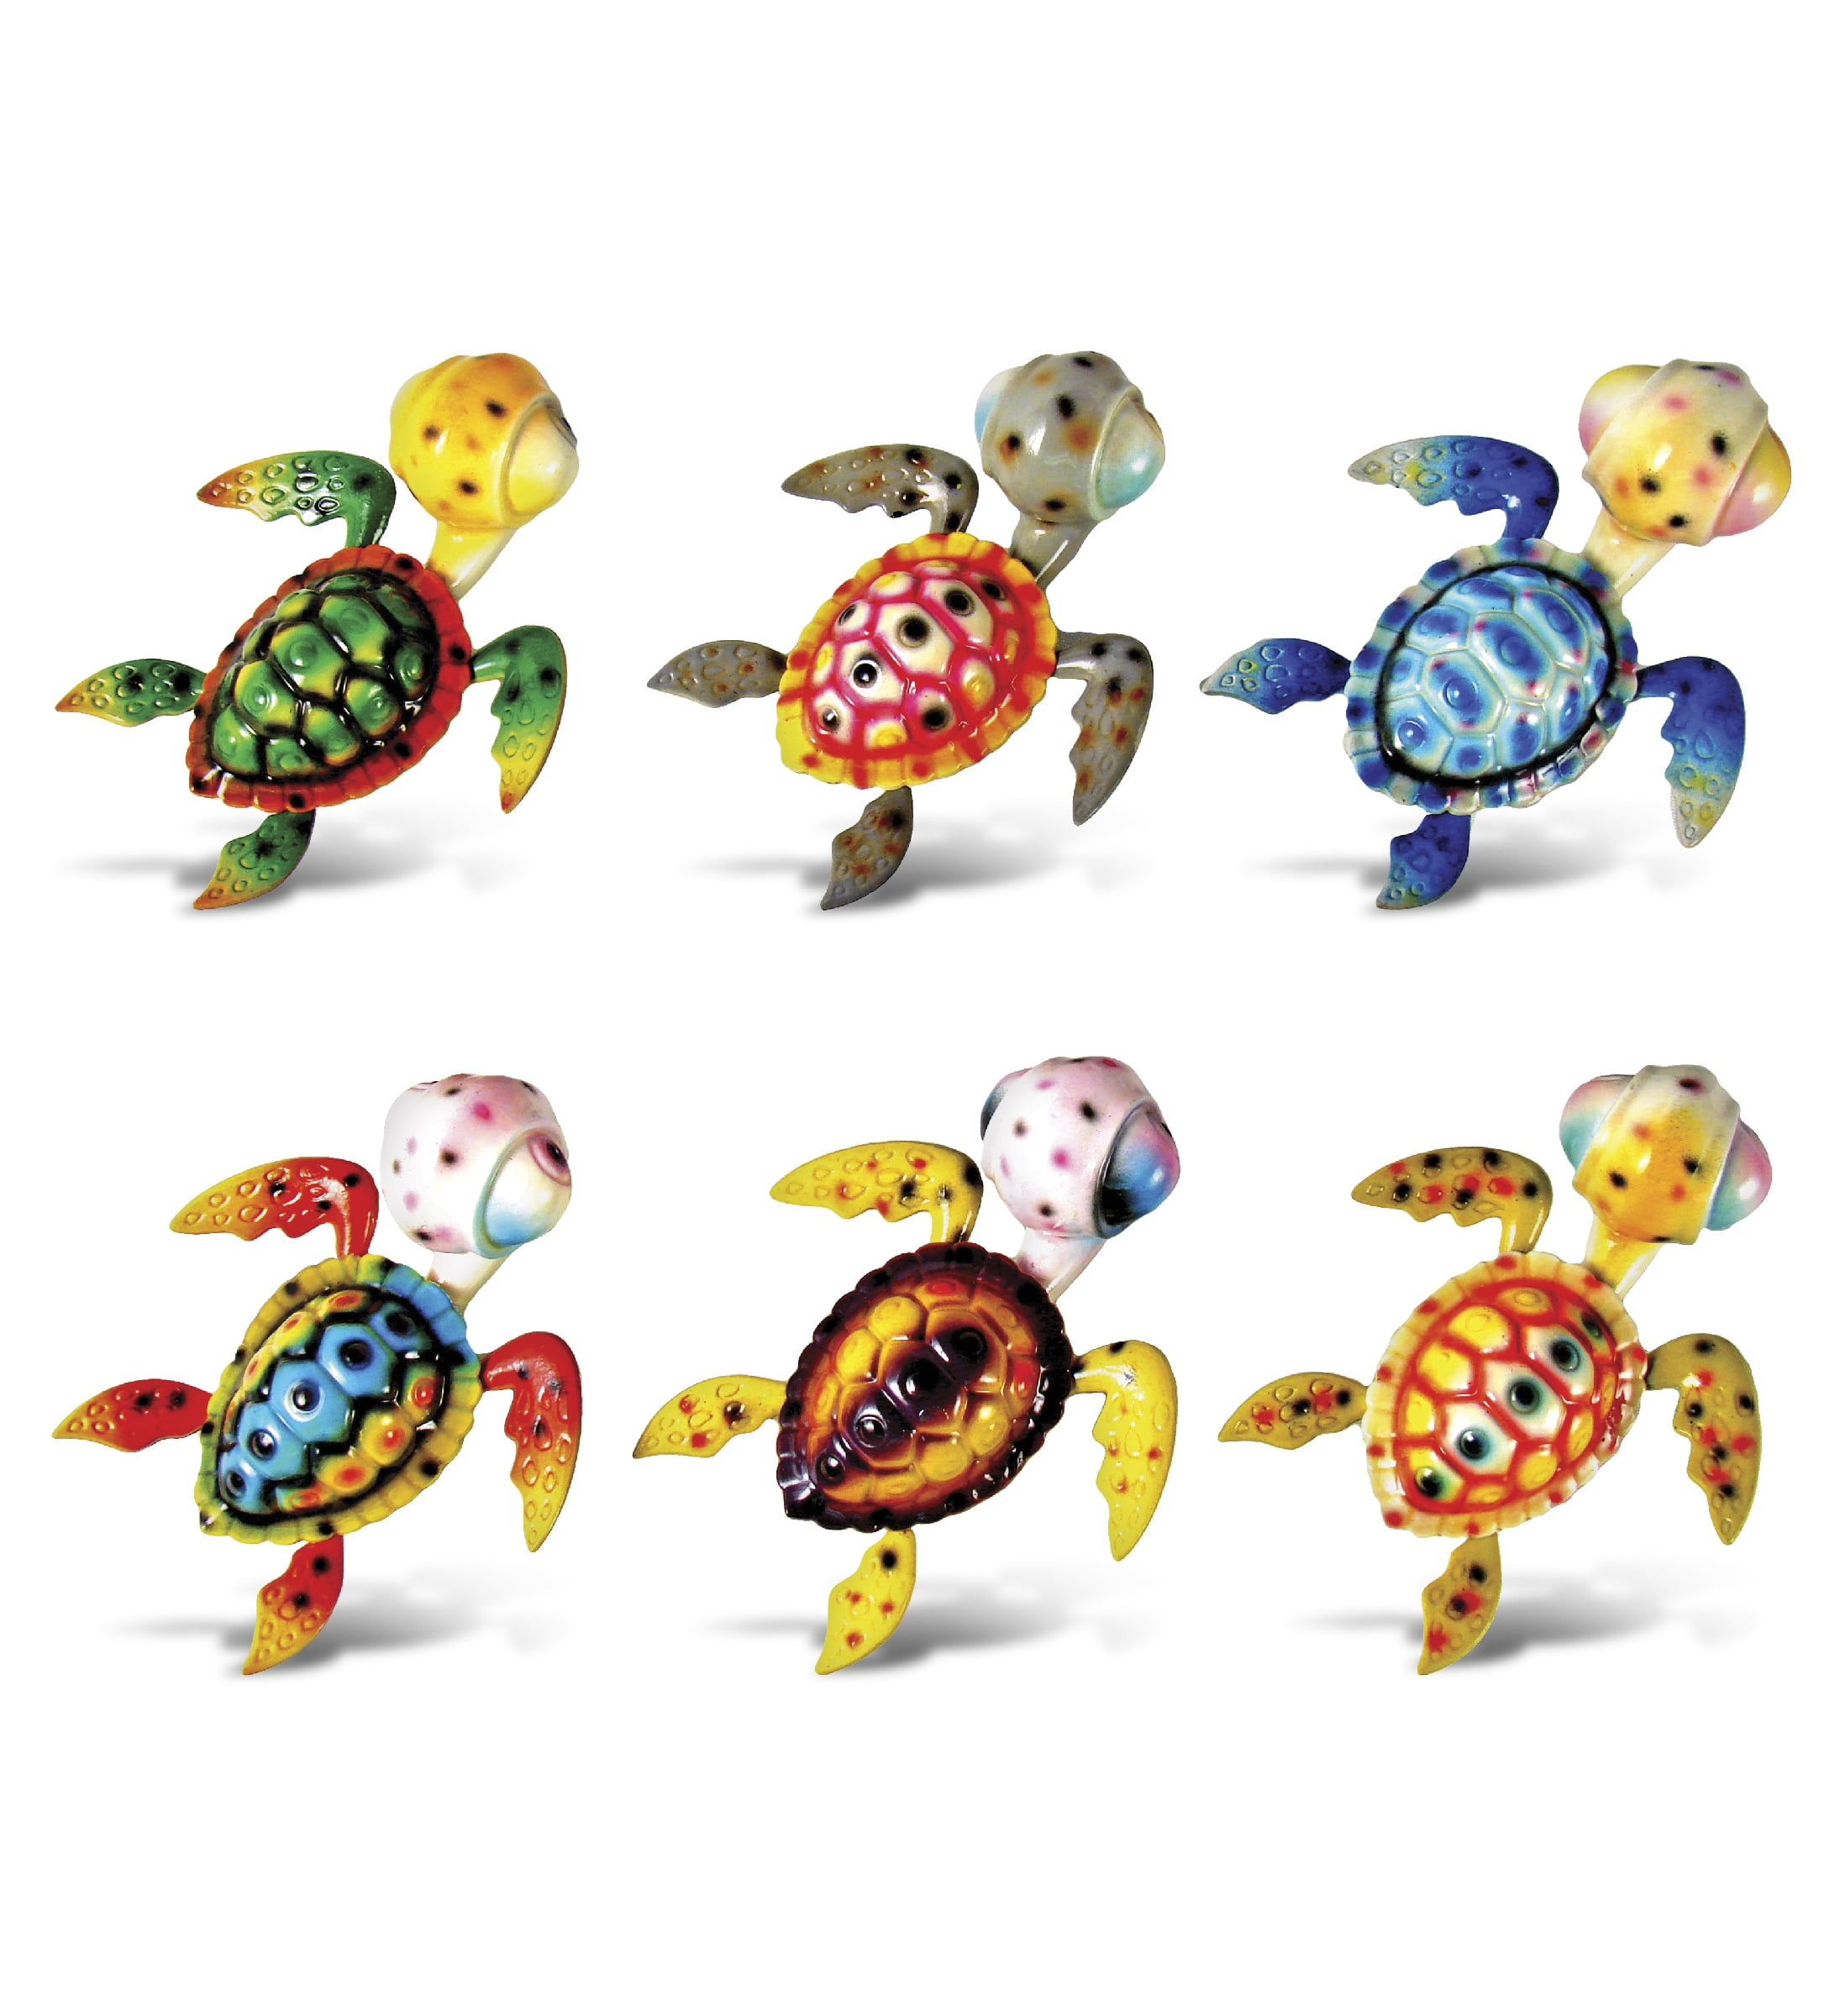 Blue Turtle Magnets Rubber Ducky Magnets - Set of 6 - Duck Fridge Magnets -  Fun for Ducking,Home,Refrigerator or Office (Duck Magnets Set 1)